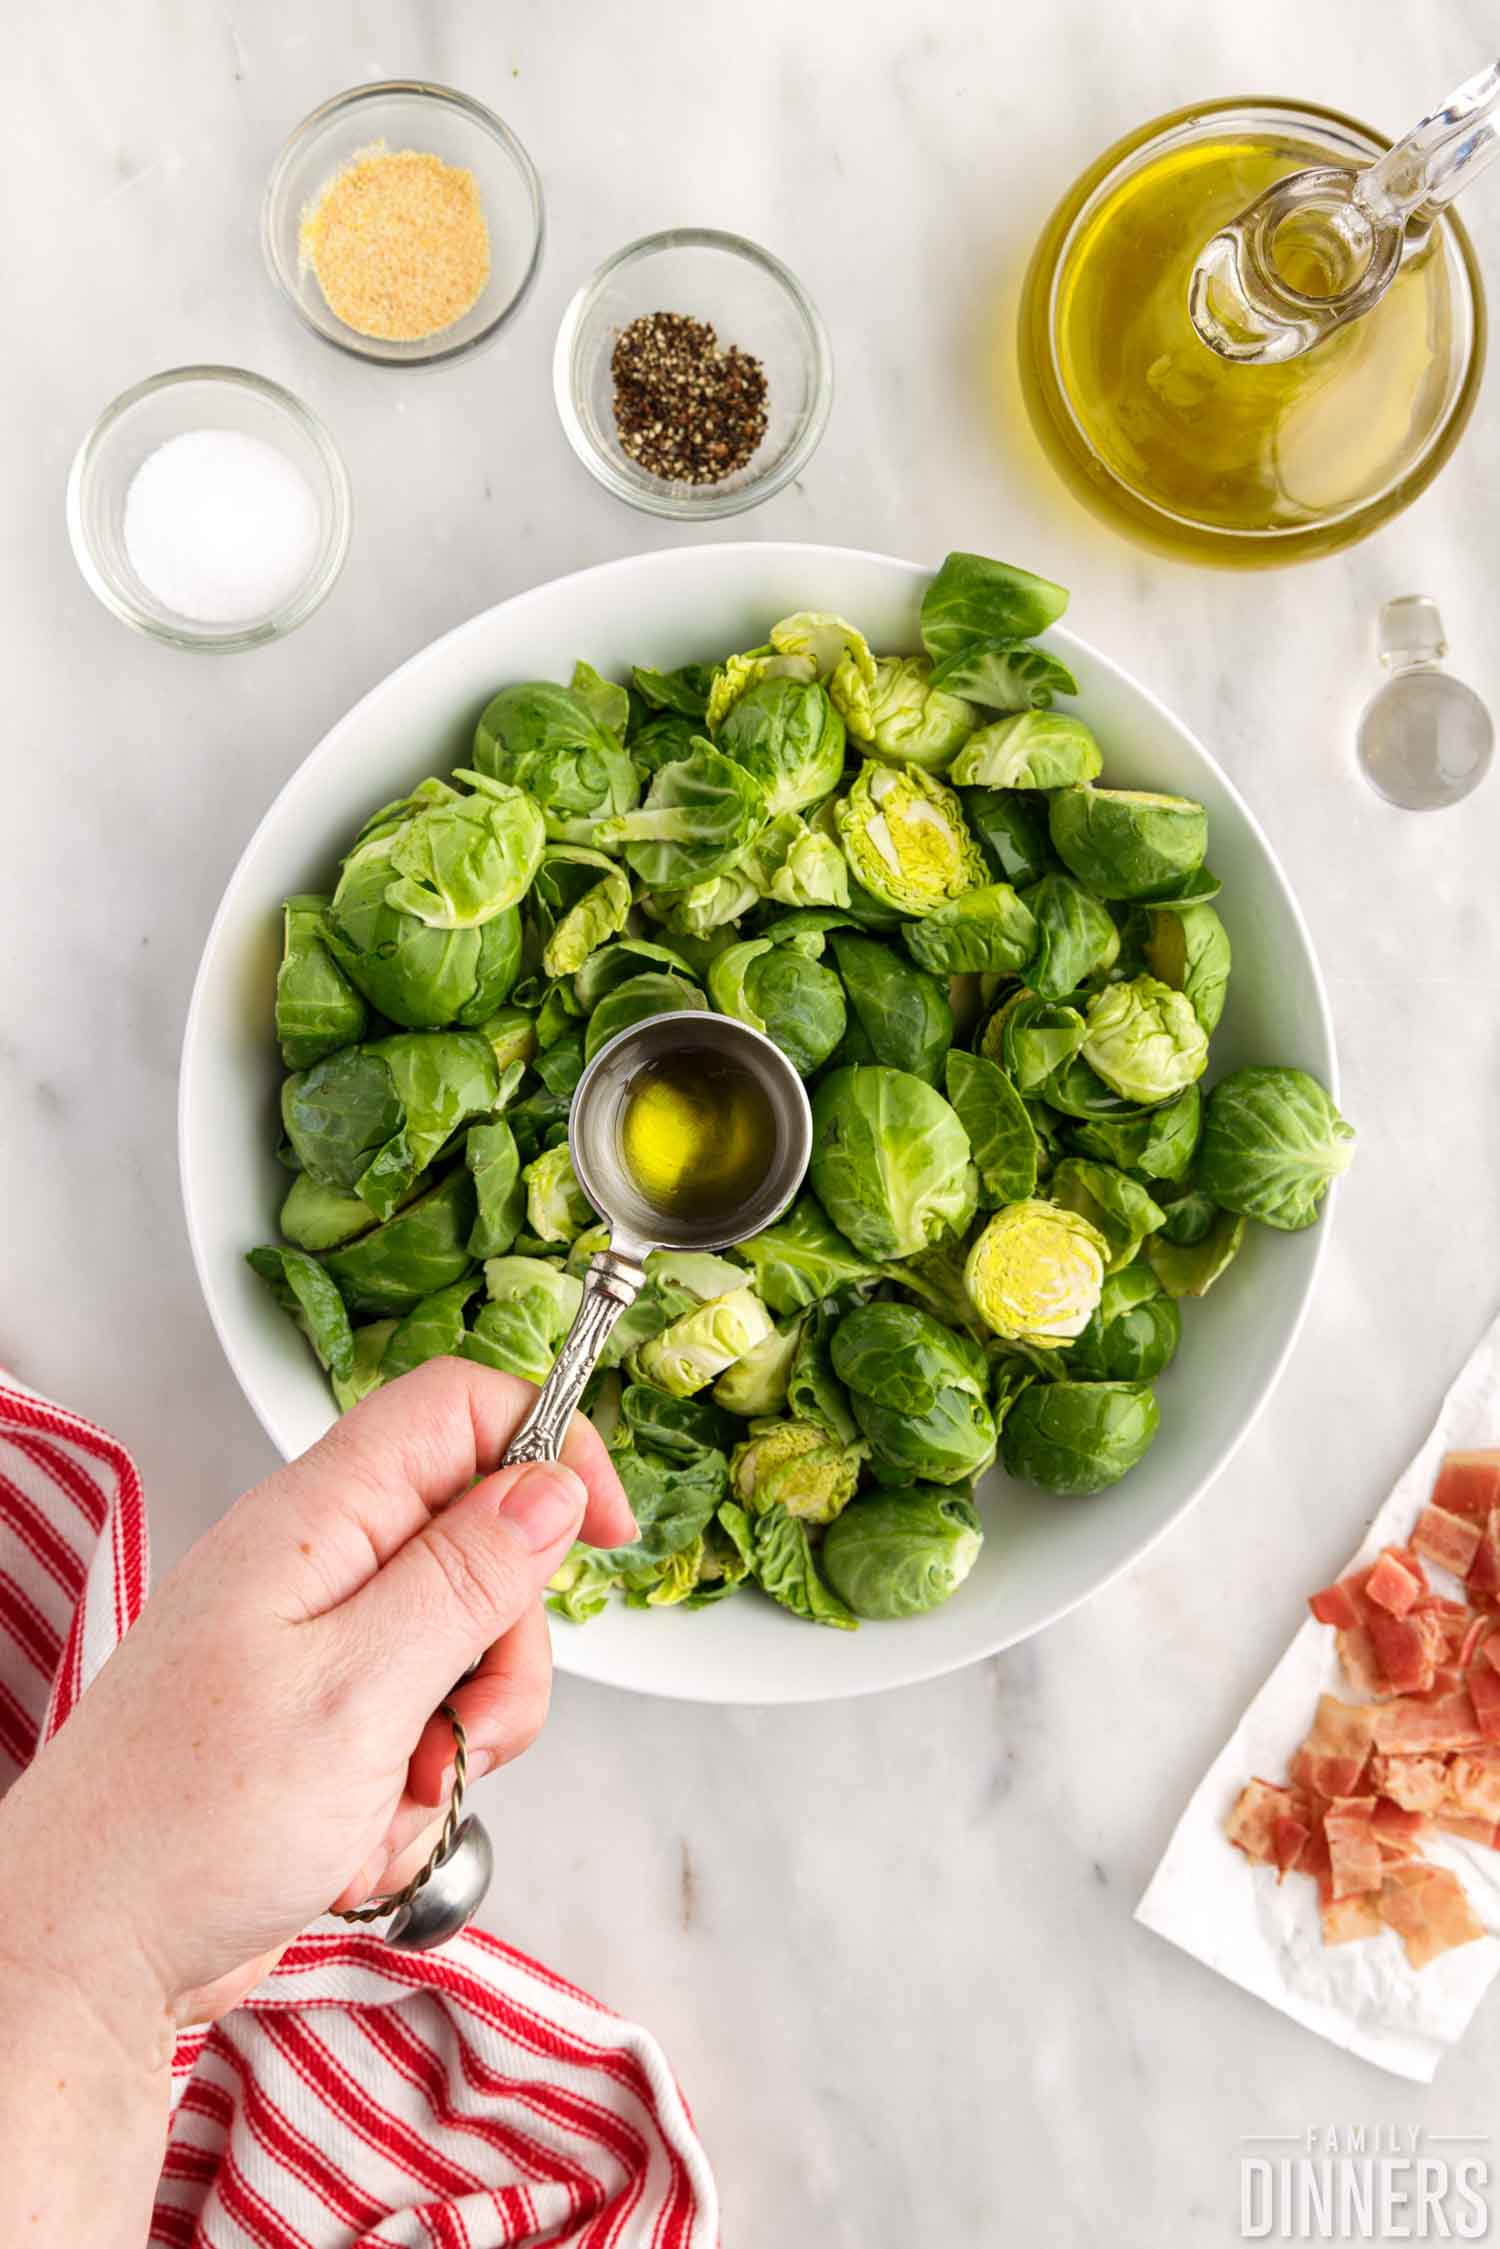 Oil poured over brussels sprouts.